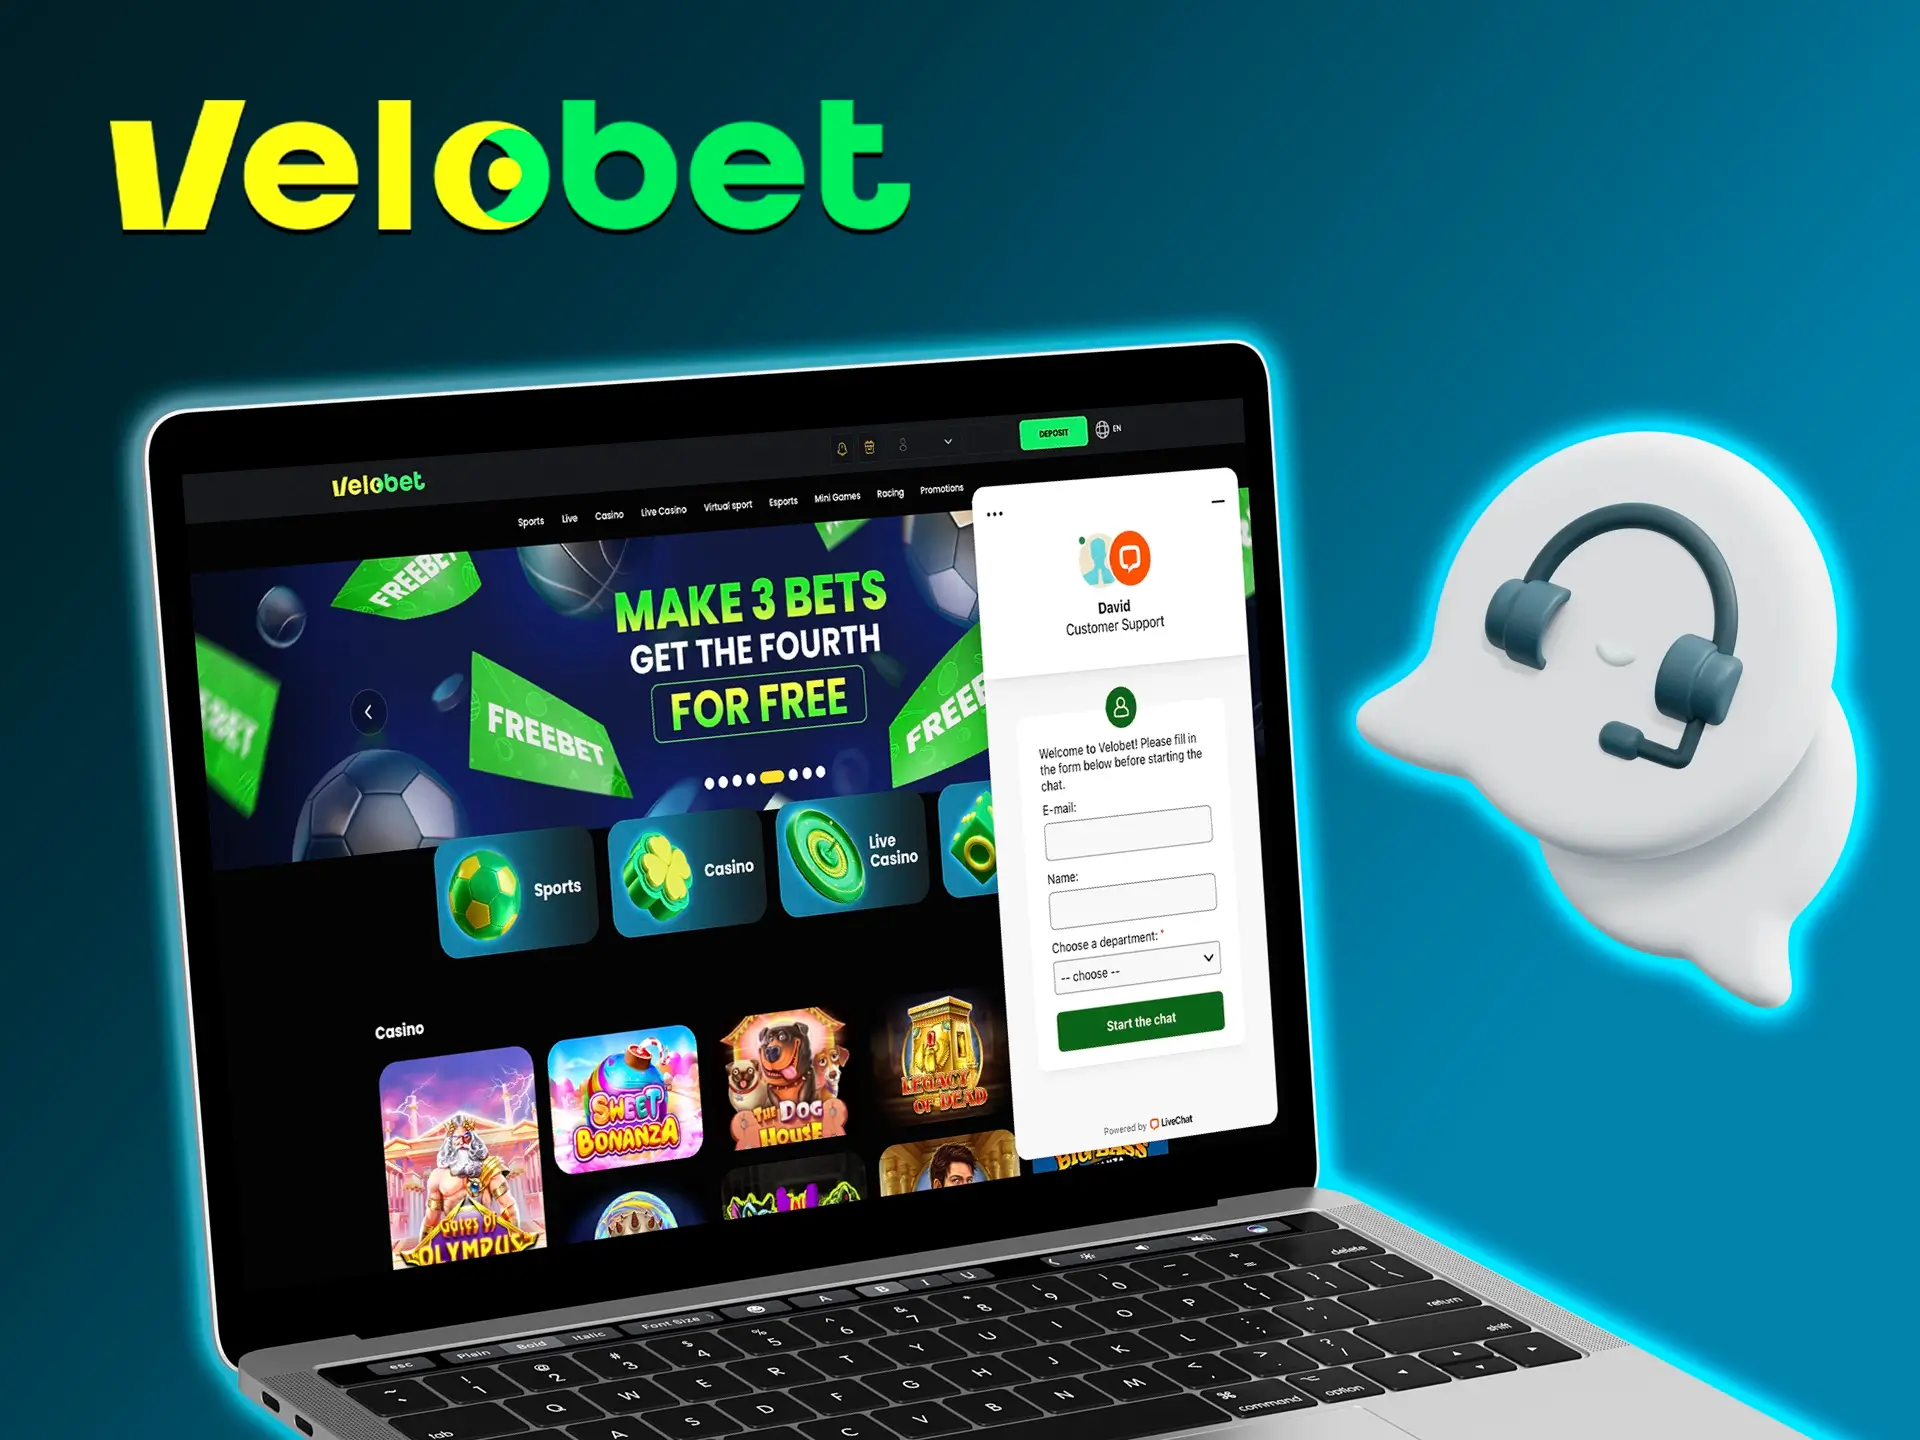 If you have any questions, always contact Velobet customer support, the team of professionals will always be able to help you.